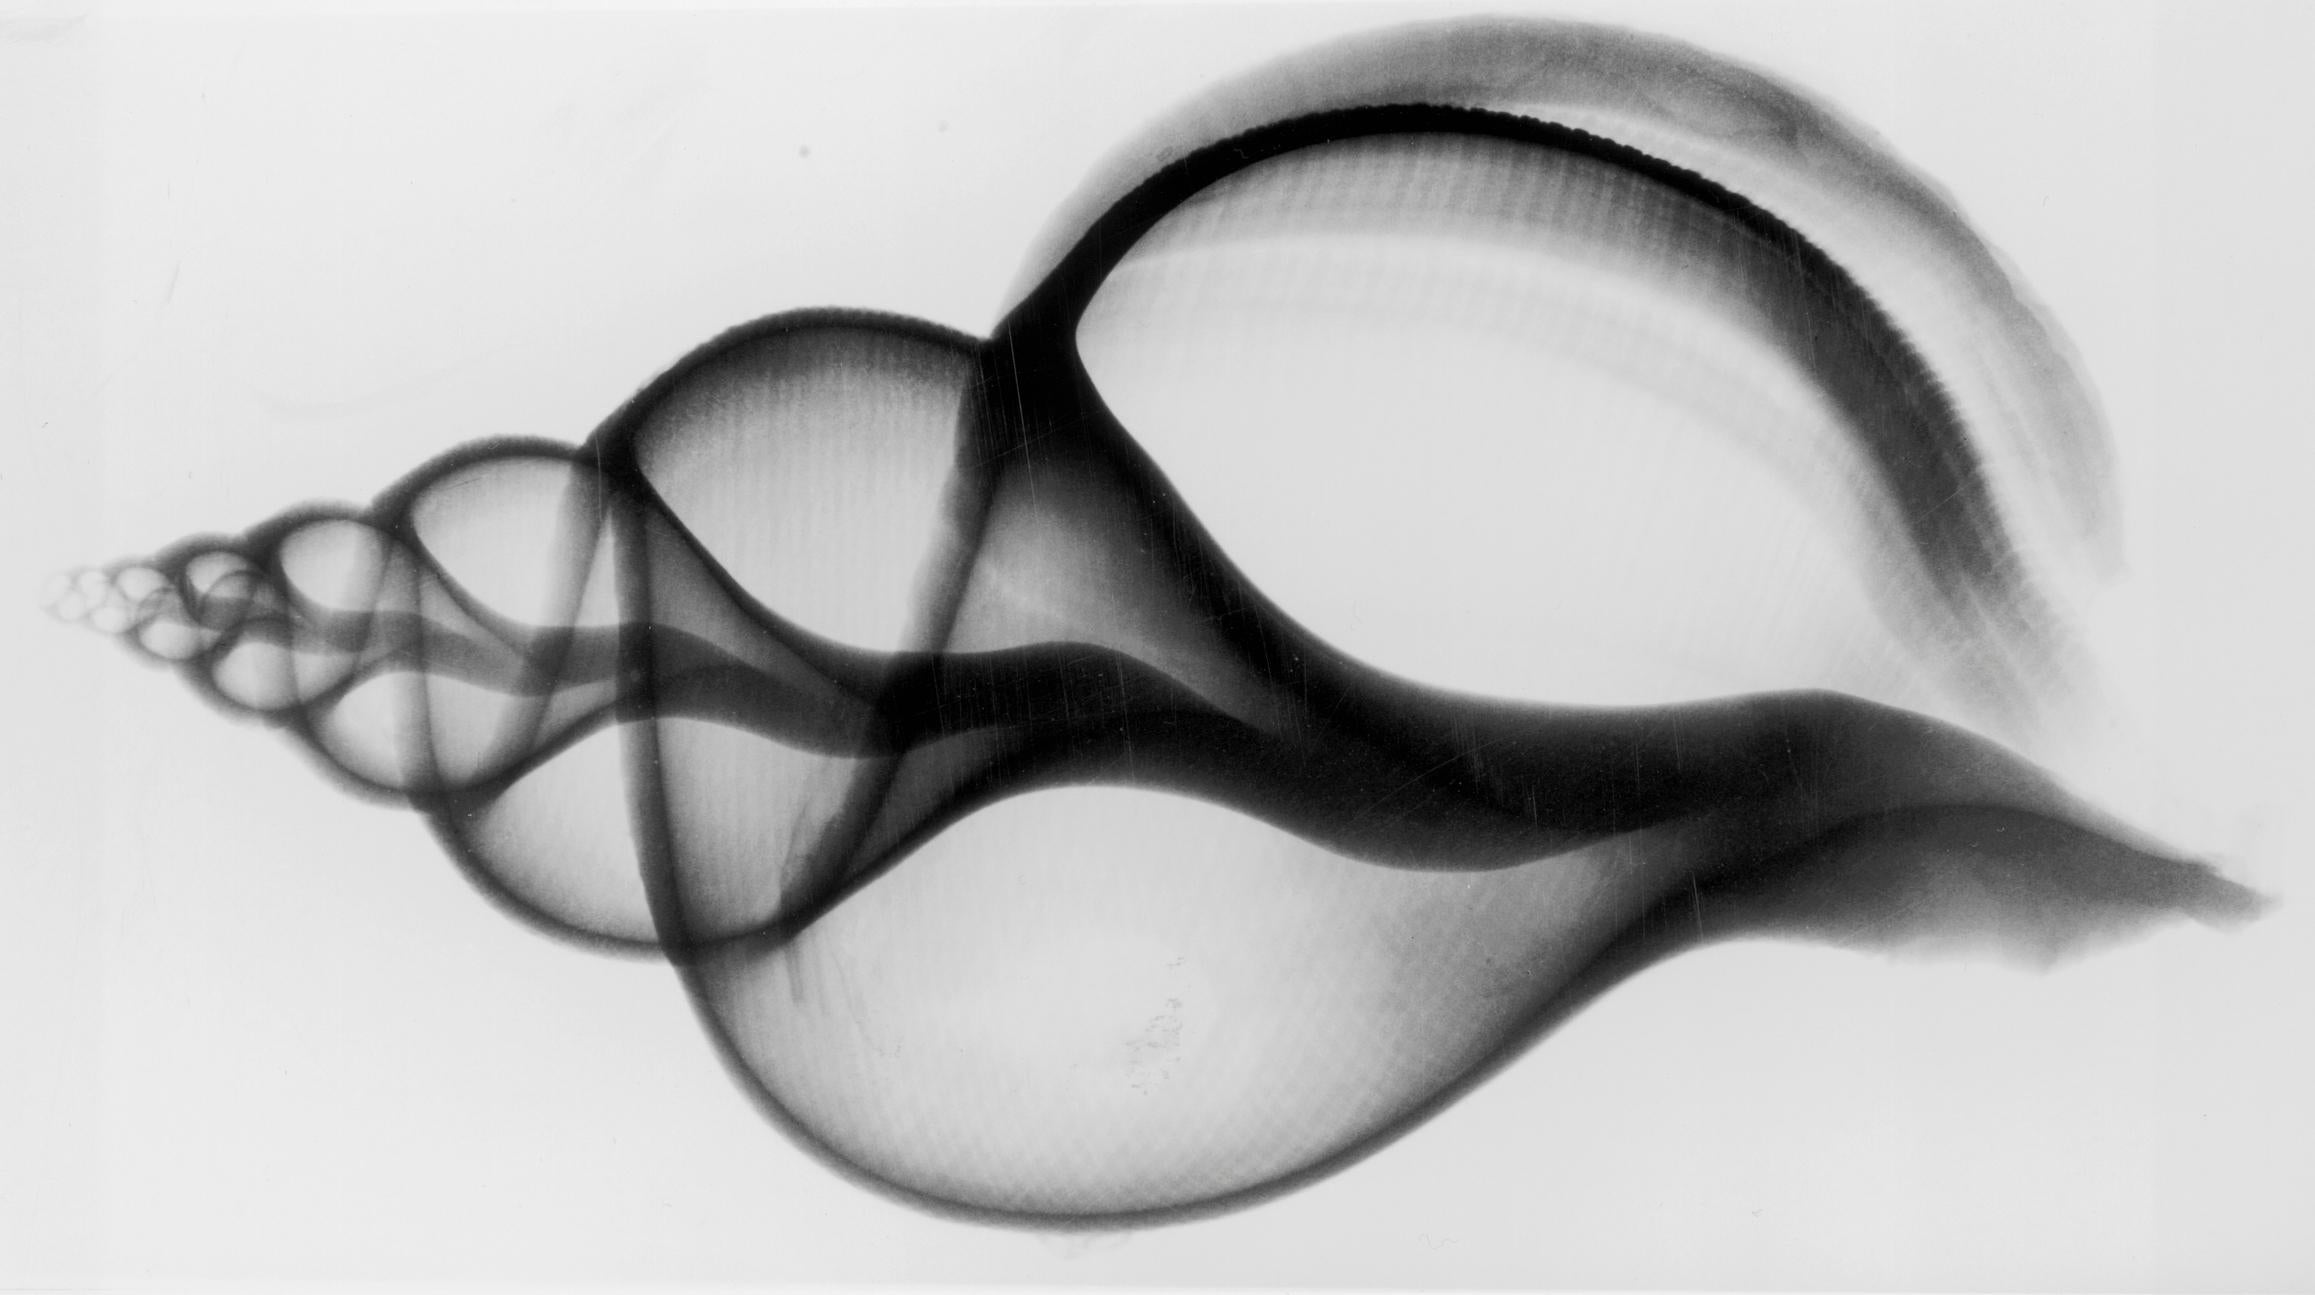 X-Ray Seashell Pair, Circa 1910, Silver Gelatin prints, Black & White, Abstract - Photograph by Edward Charles Le Grice